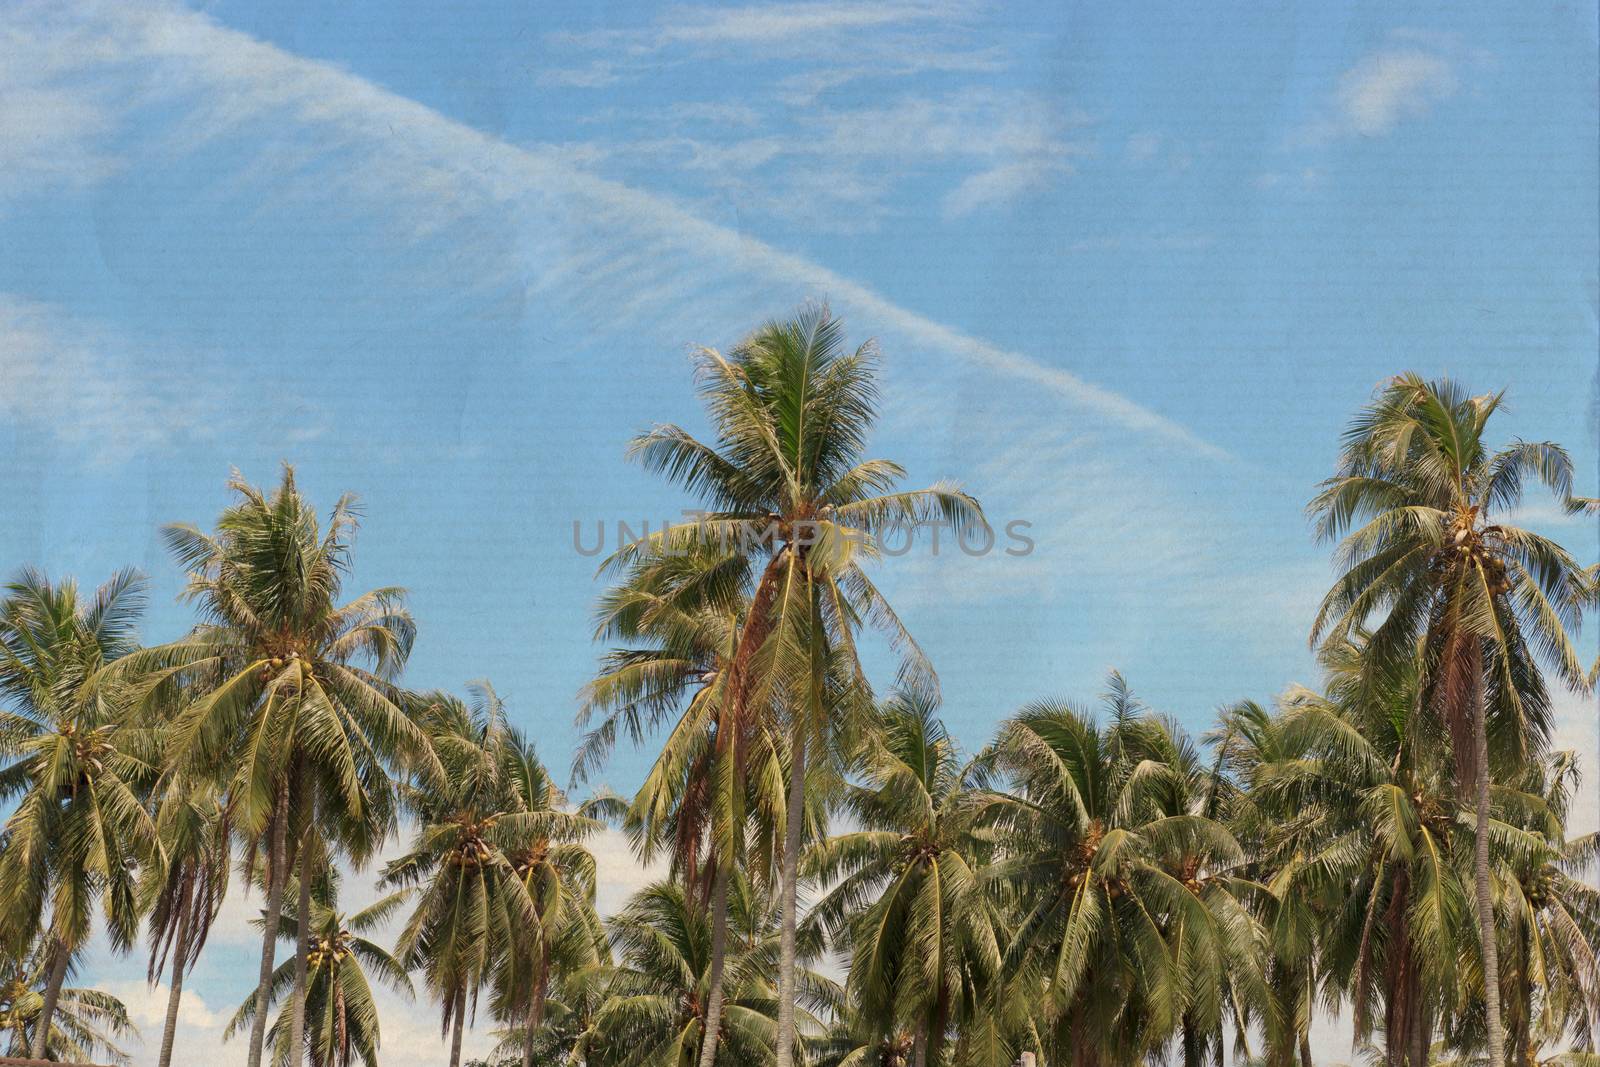 Palm trees with coconut under blue sky on an old paper.